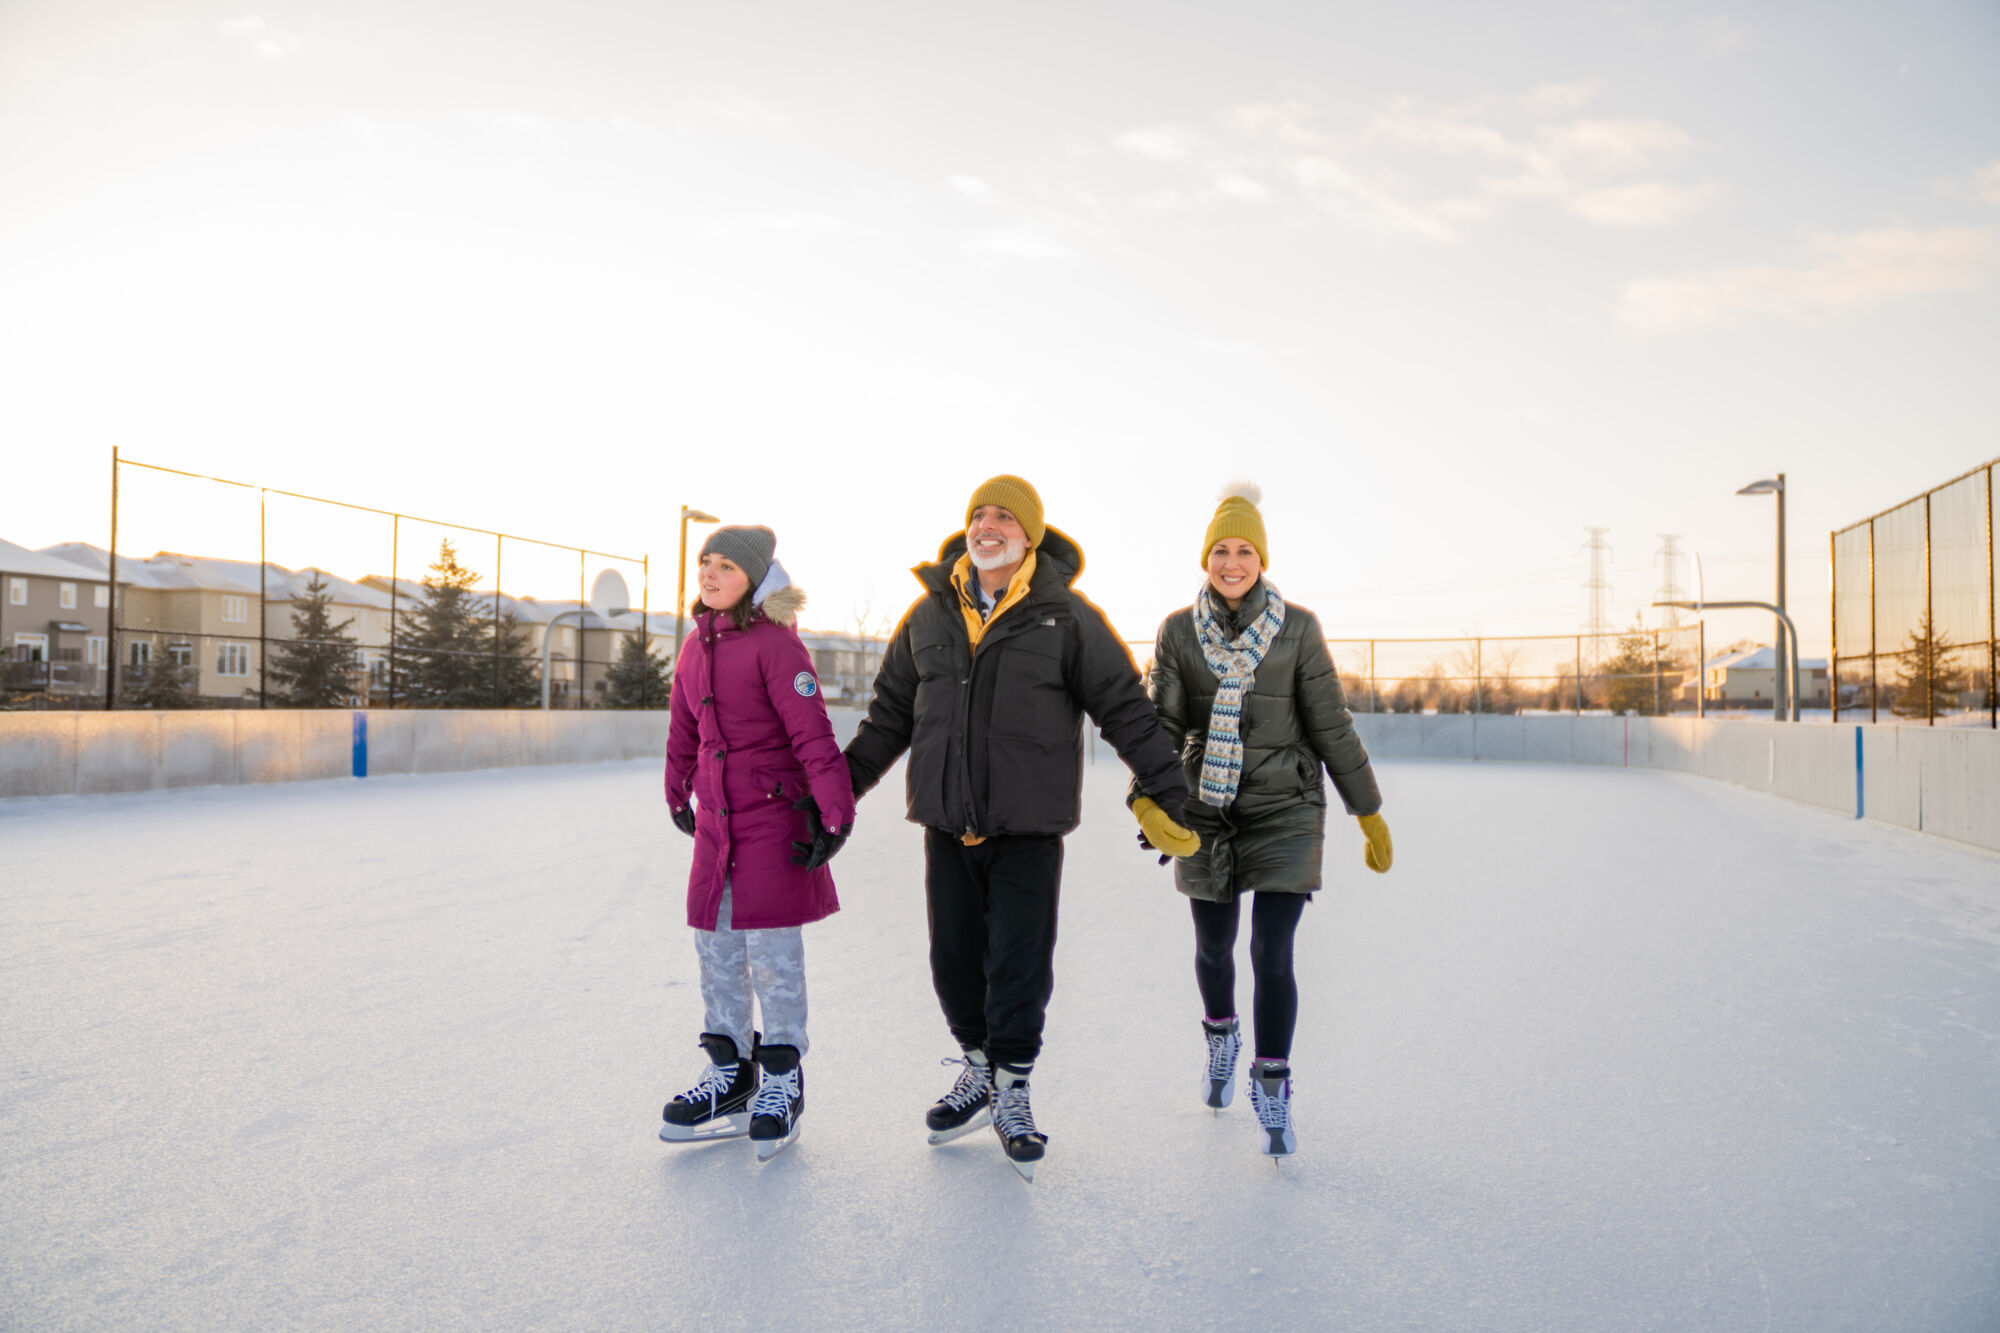 A family skating on an outdoor ice rink